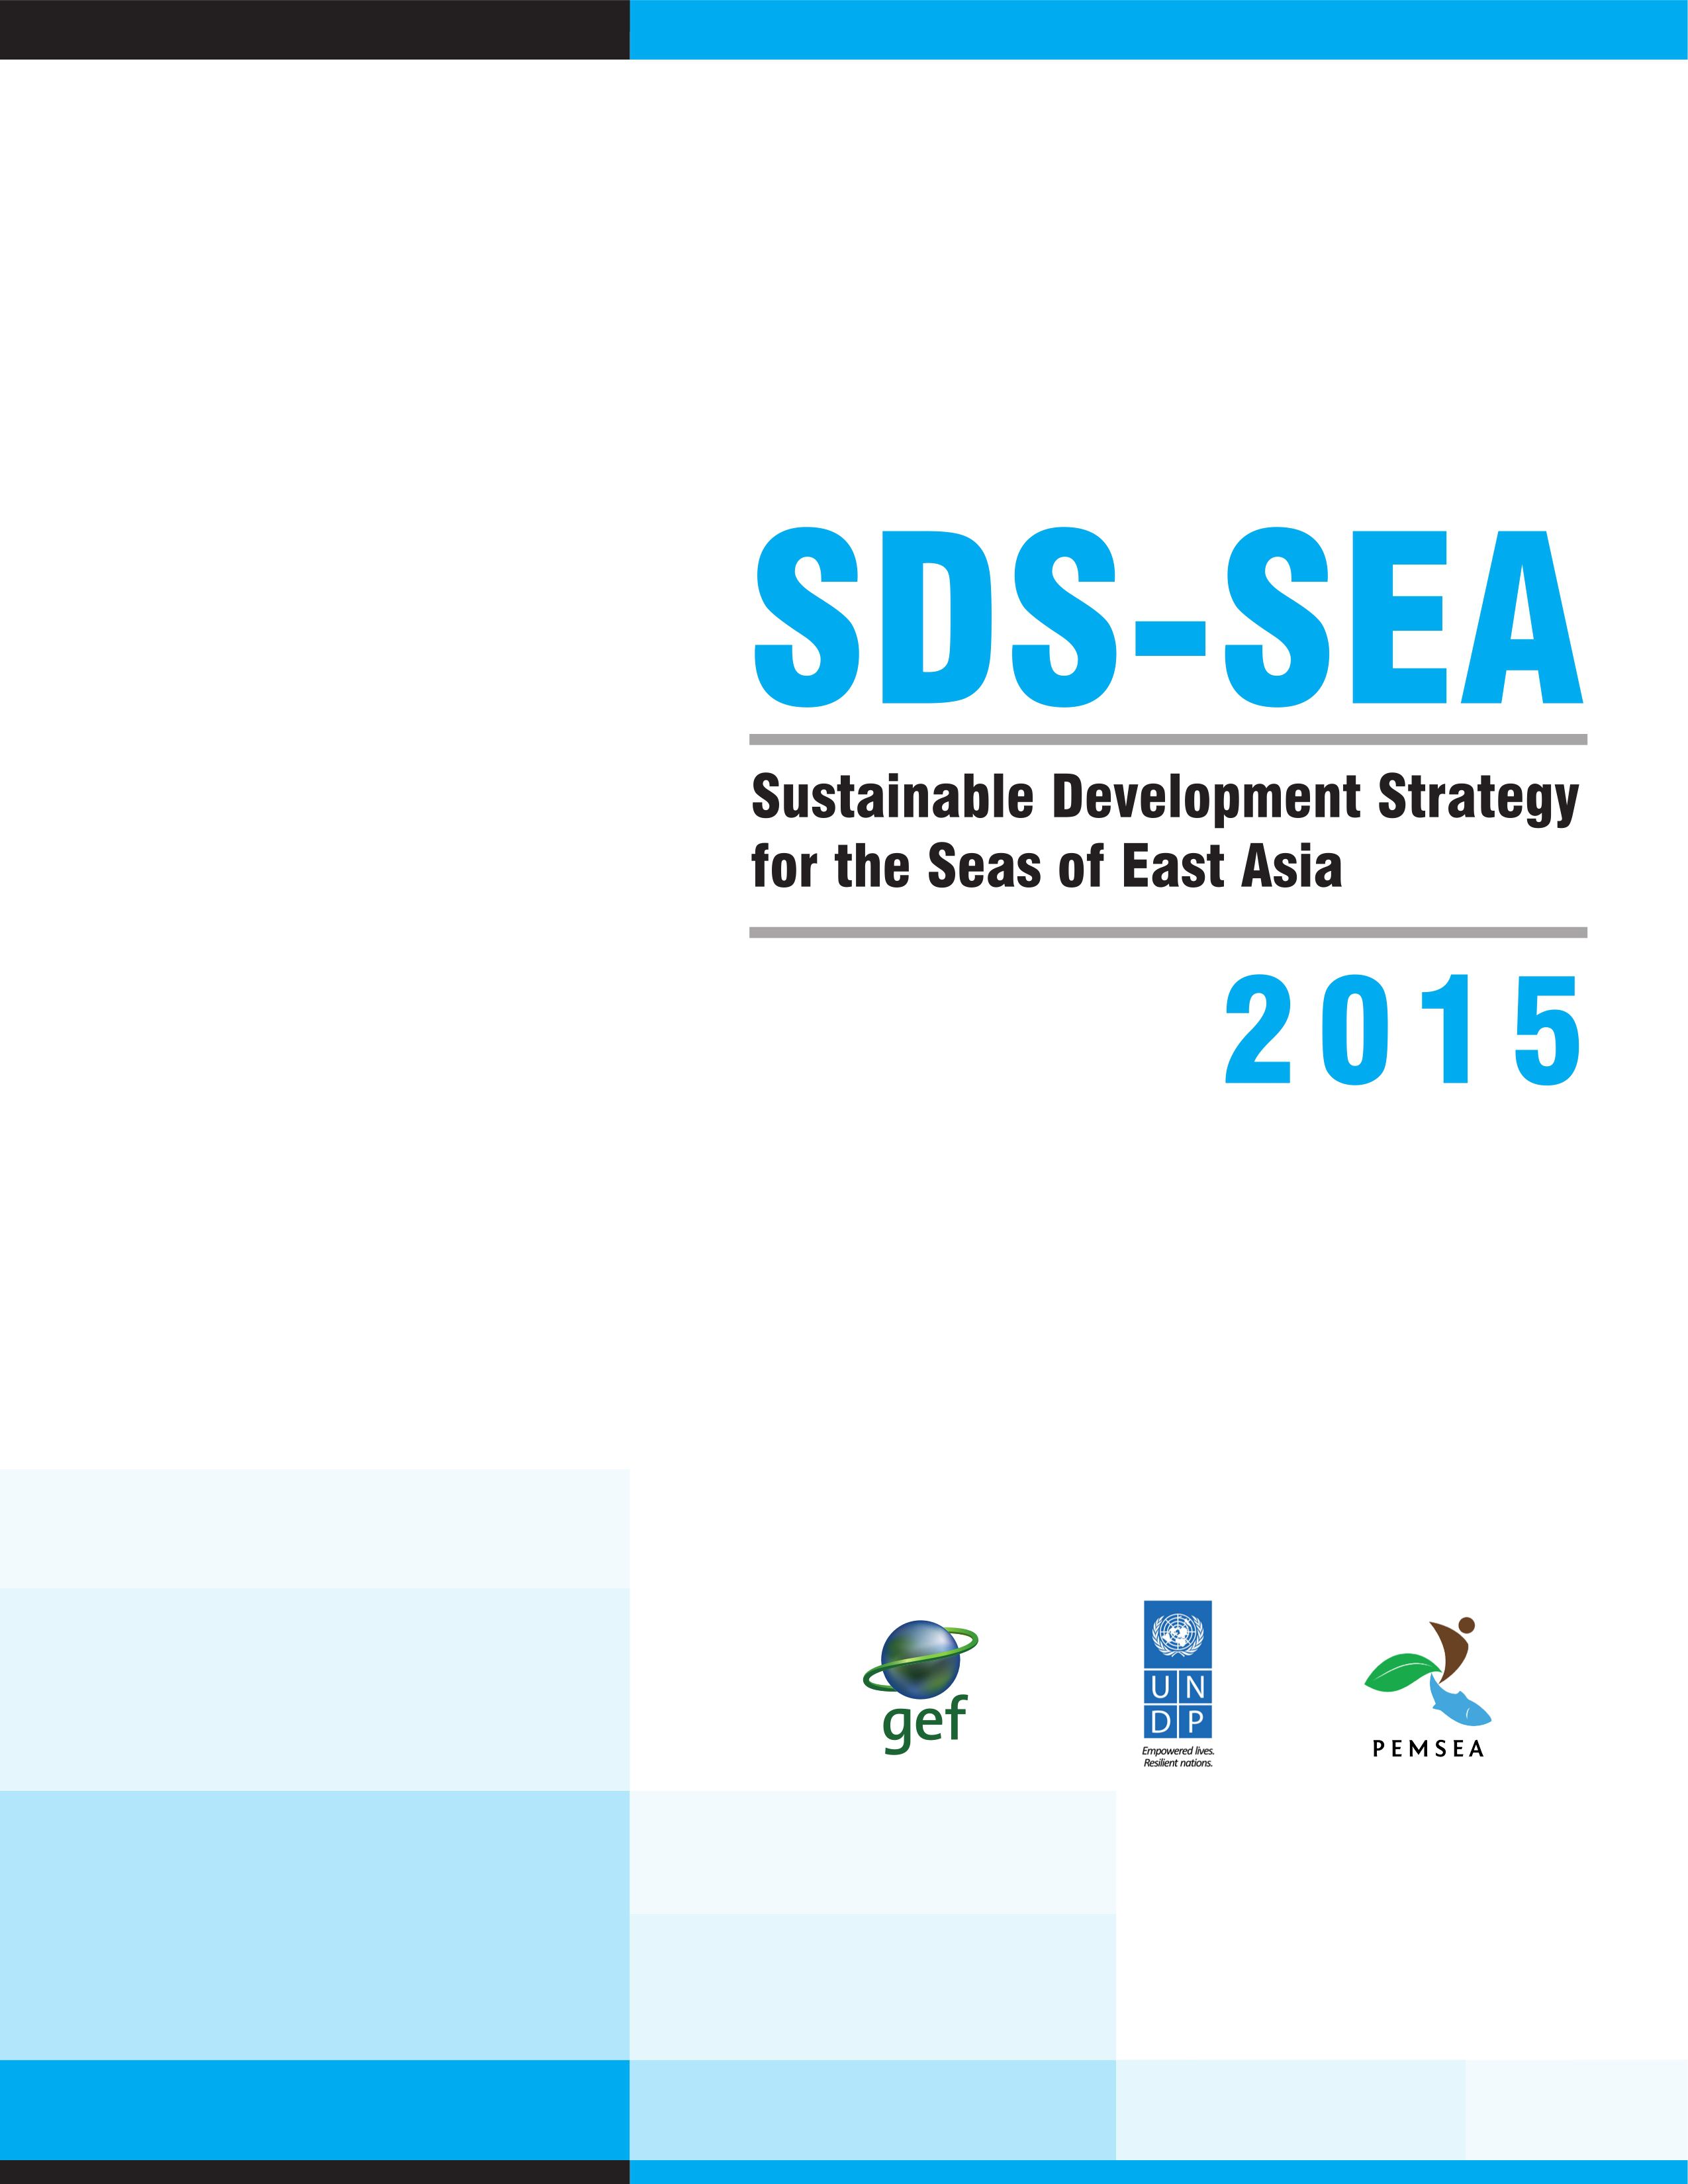 Sustainable Development Strategy for the Seas of East Asia